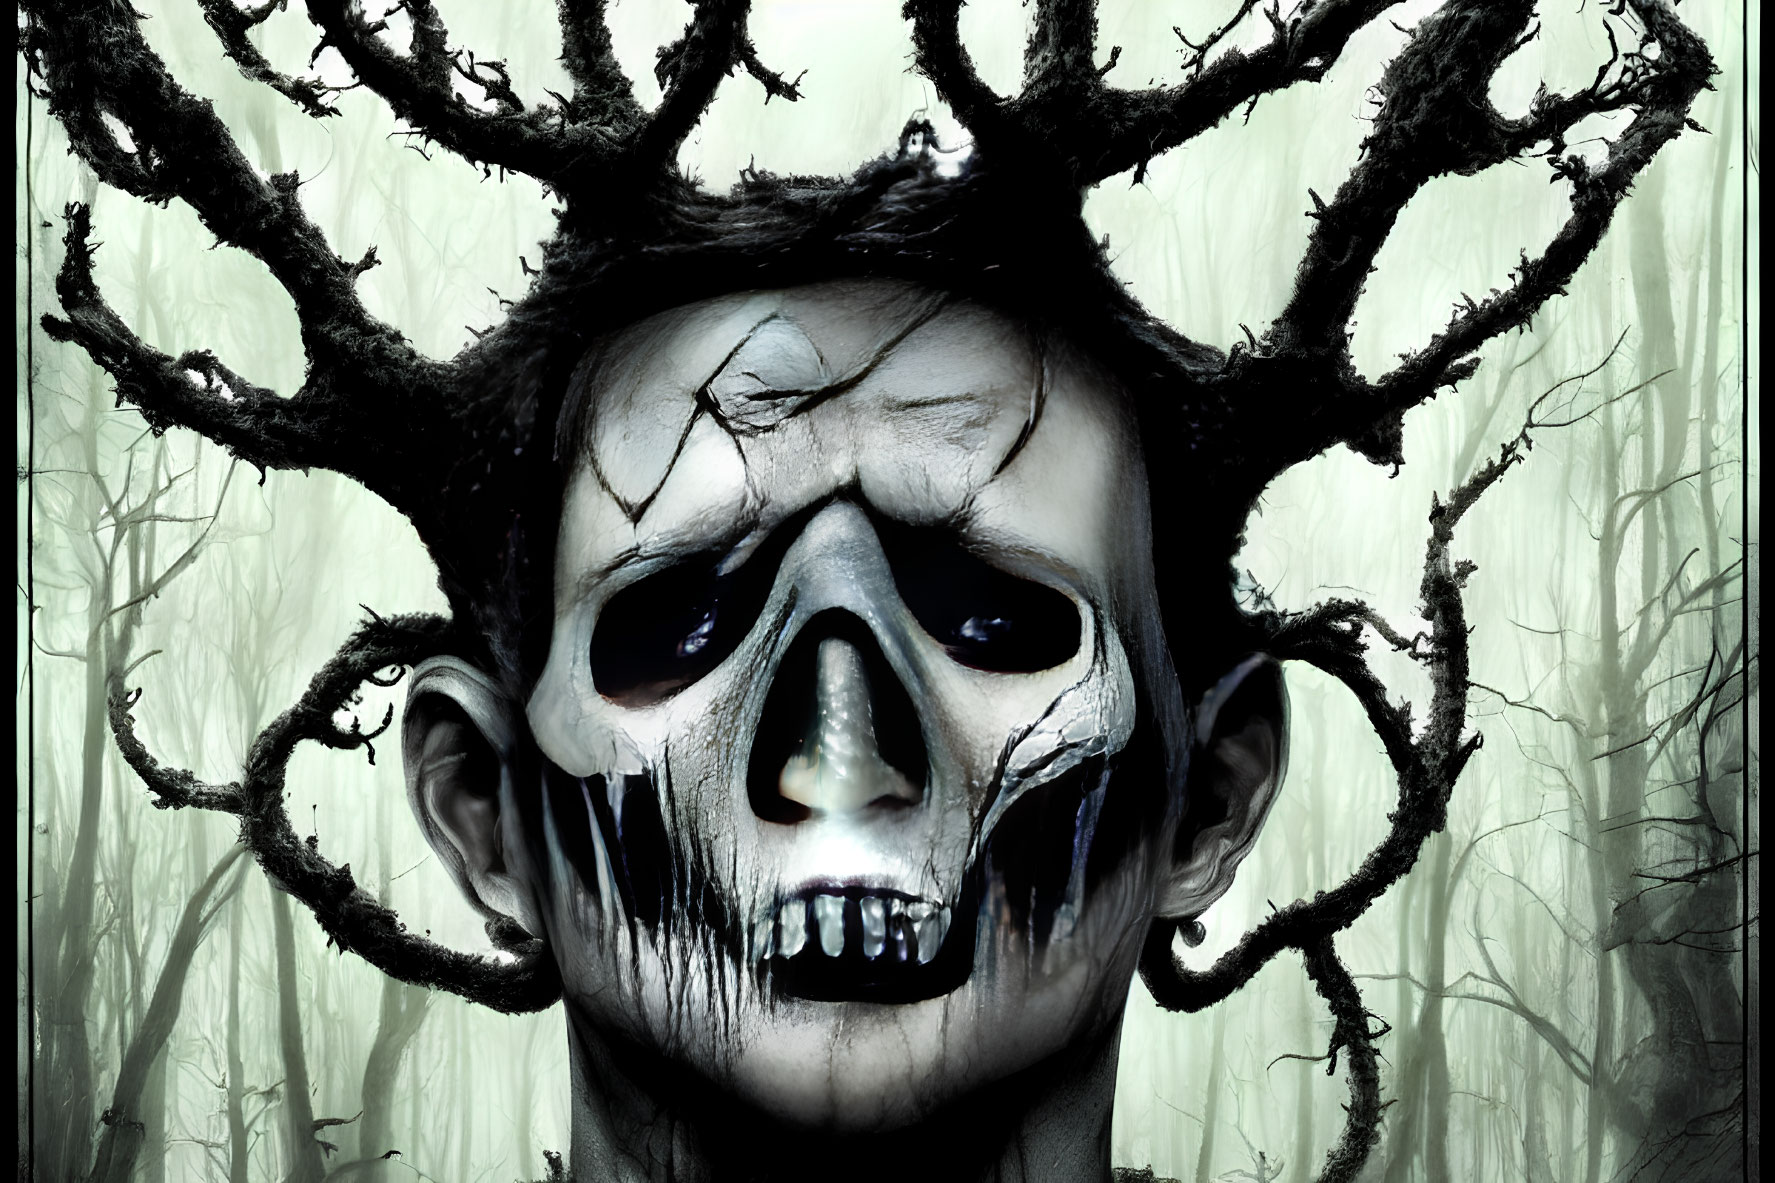 Skull-faced human with branch-like horns in wooded scene